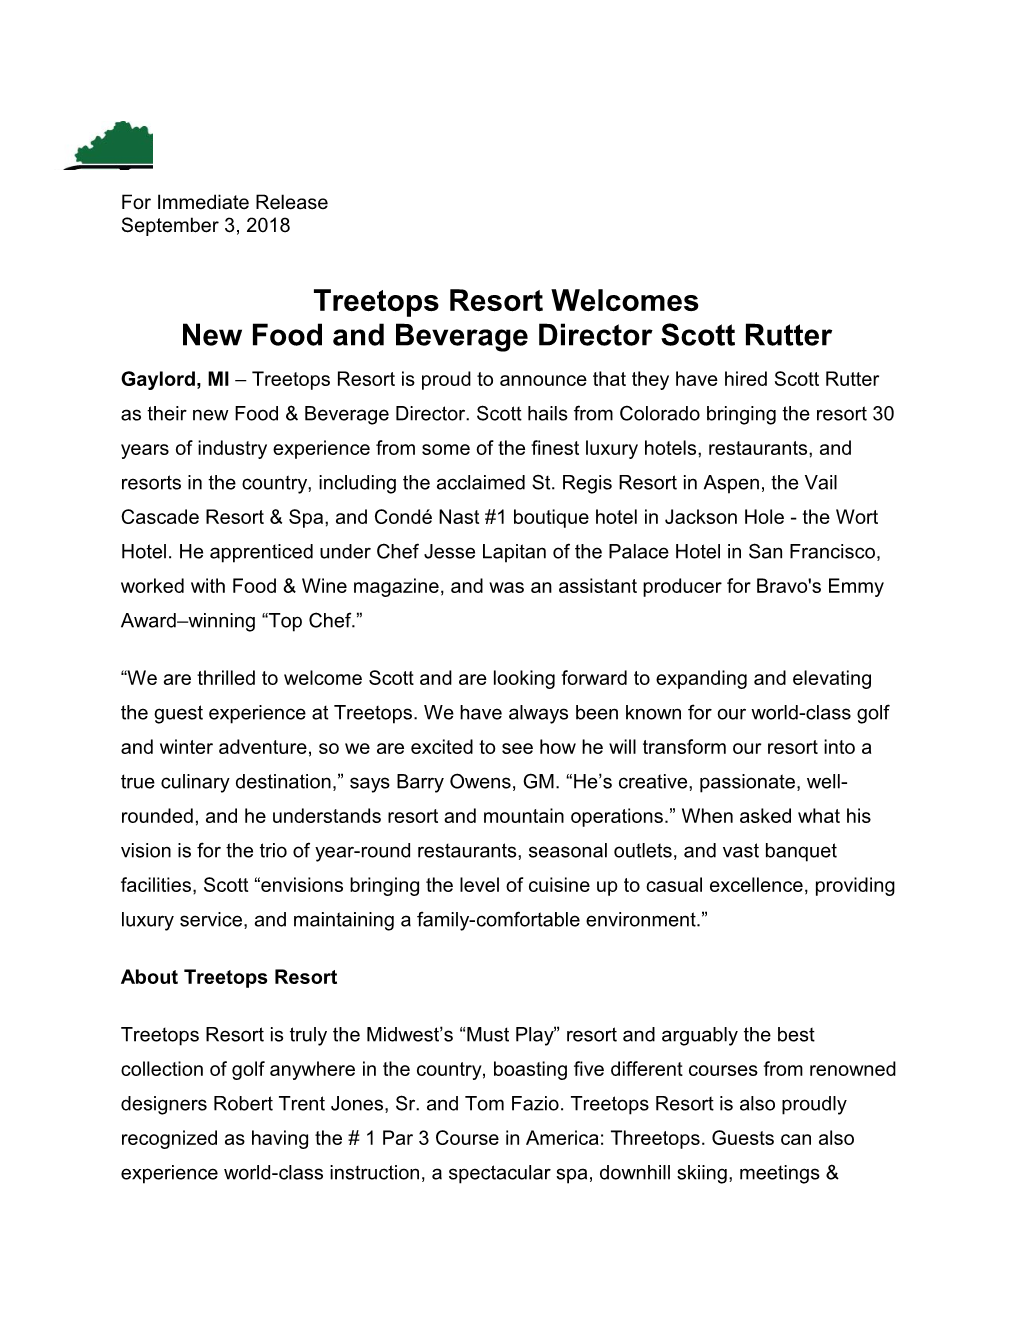 New Food and Beverage Director Scott Rutter